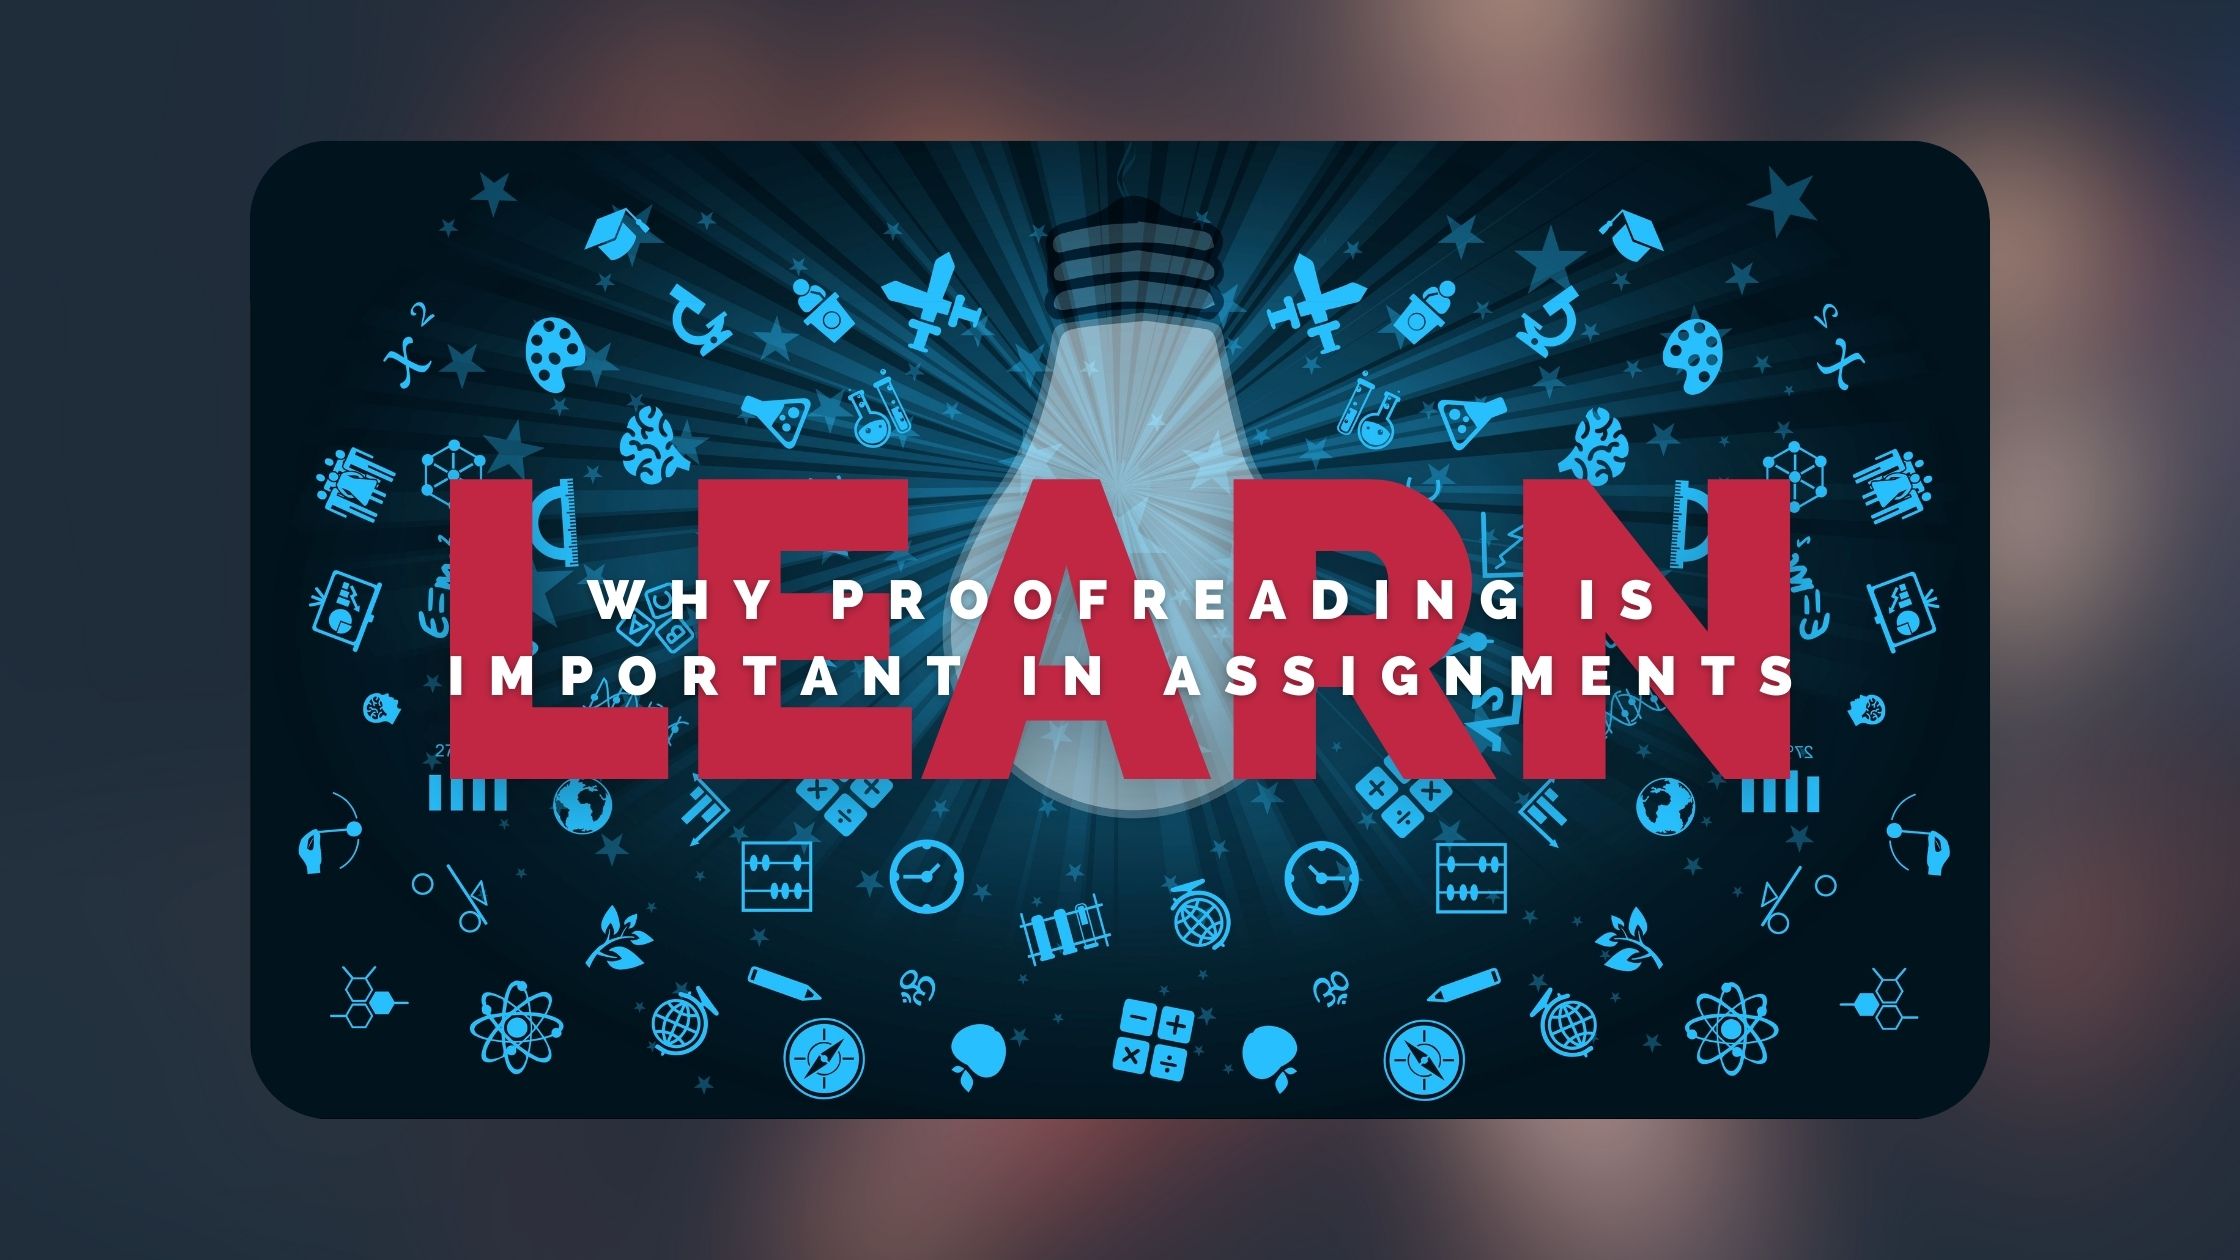 Learn Why Proofreading Is Important in Assignments